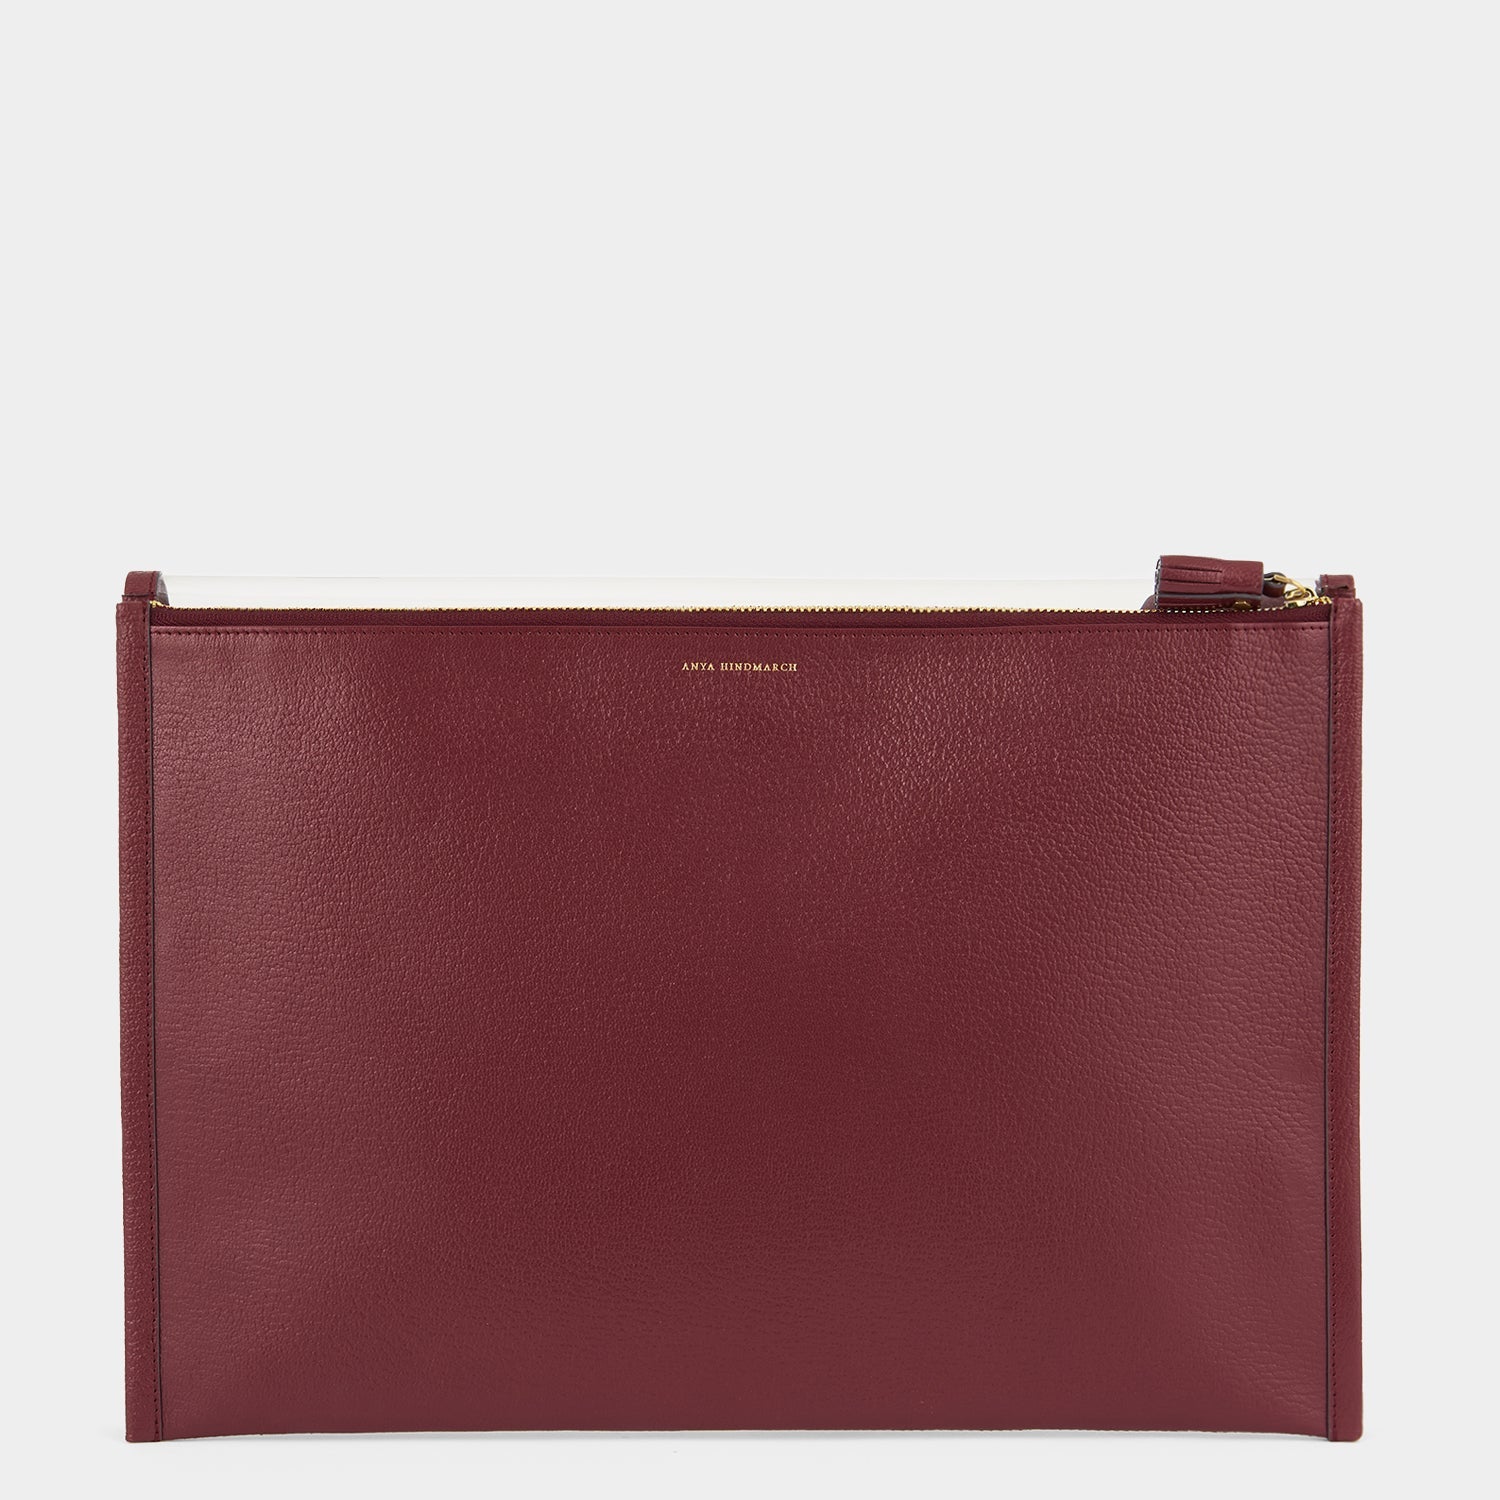 Documents Envelope -

                  
                    Capra Leather in Medium Red/Clear -
                  

                  Anya Hindmarch EU
